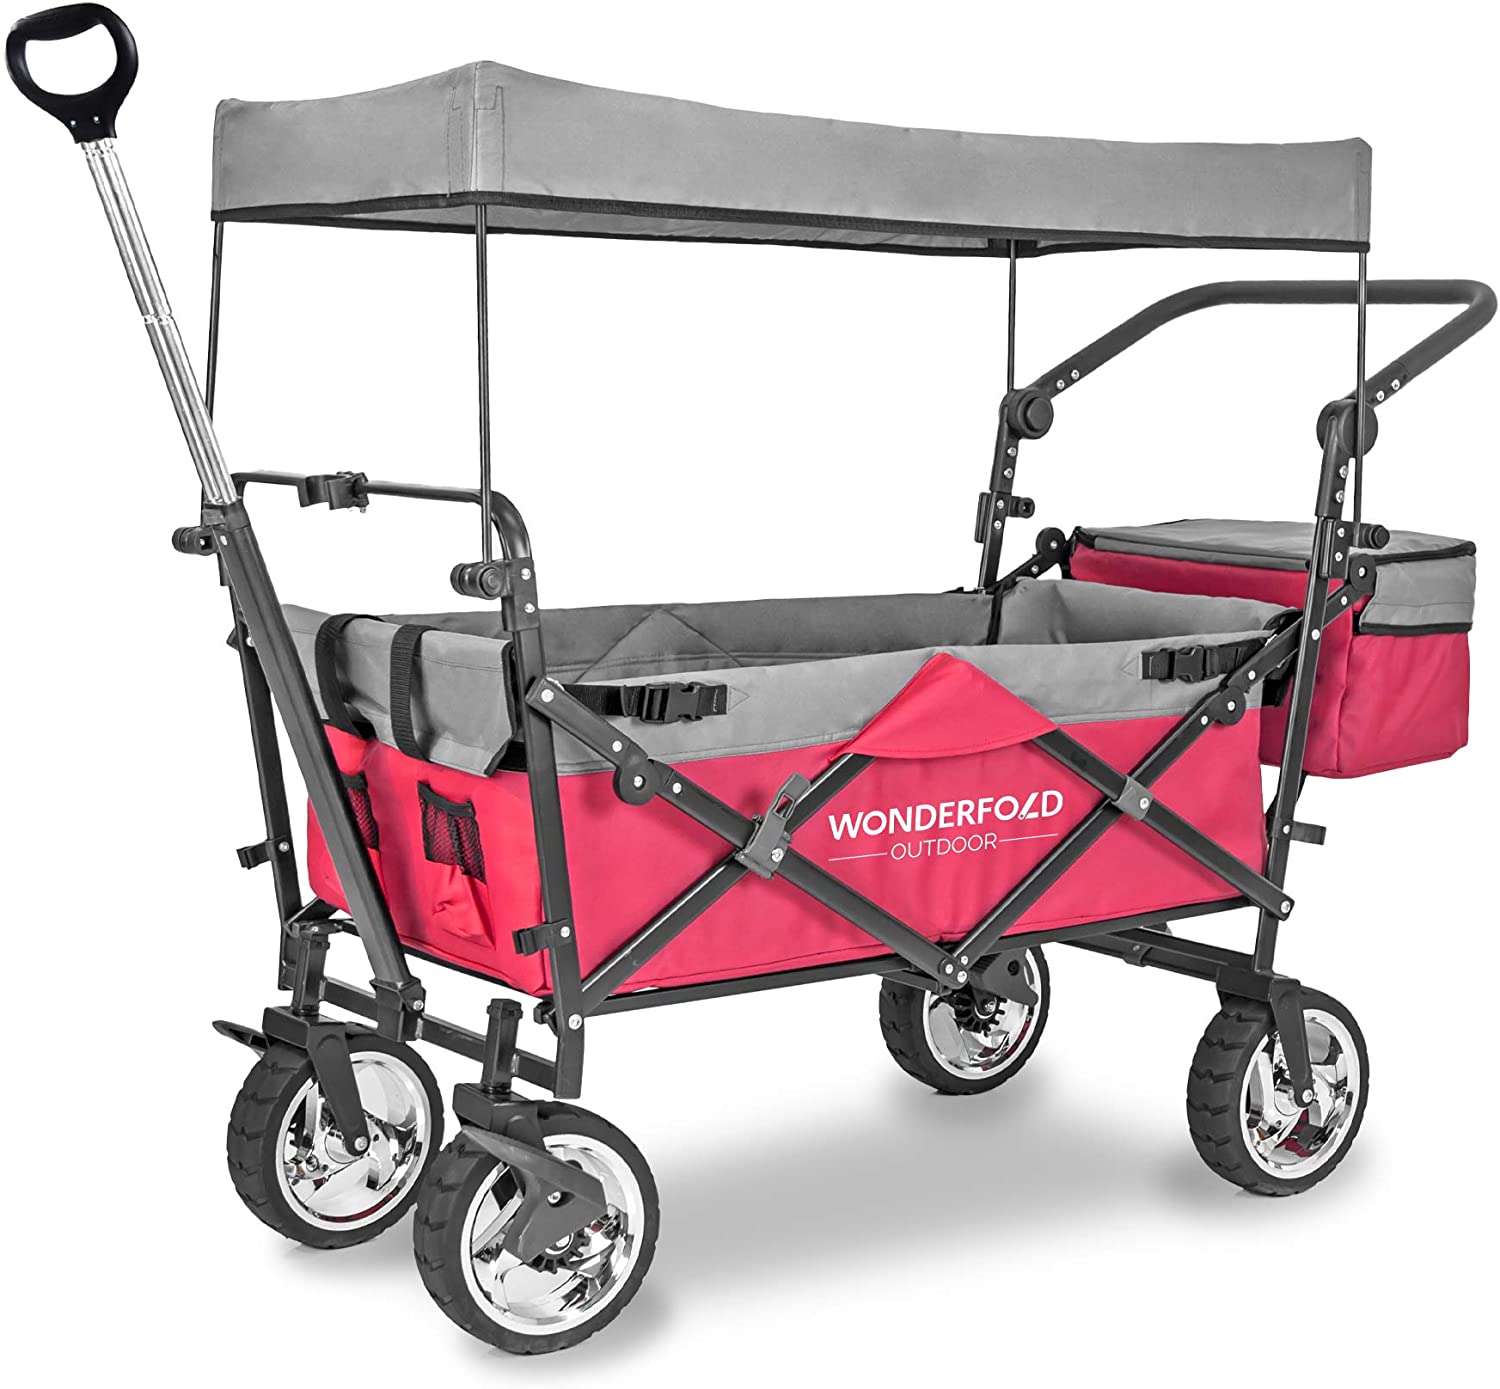 WonderFold Outdoor Push Pull Utility Folding Wagon in Red